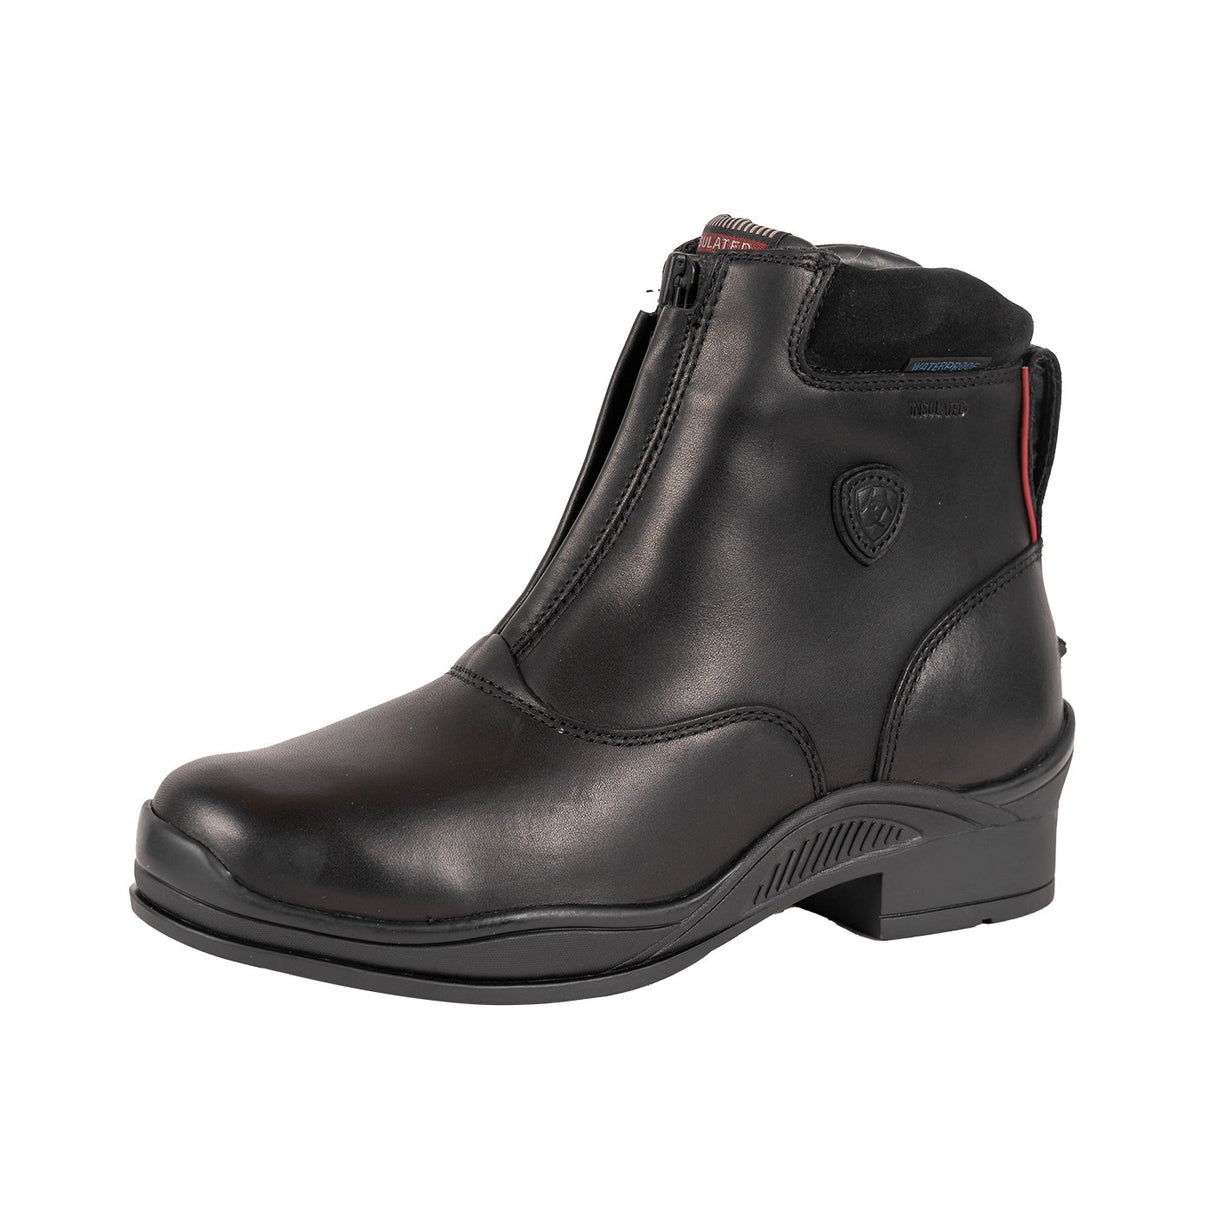 Ariat Extreme Zip H2O Insulated Winter Paddock Boots